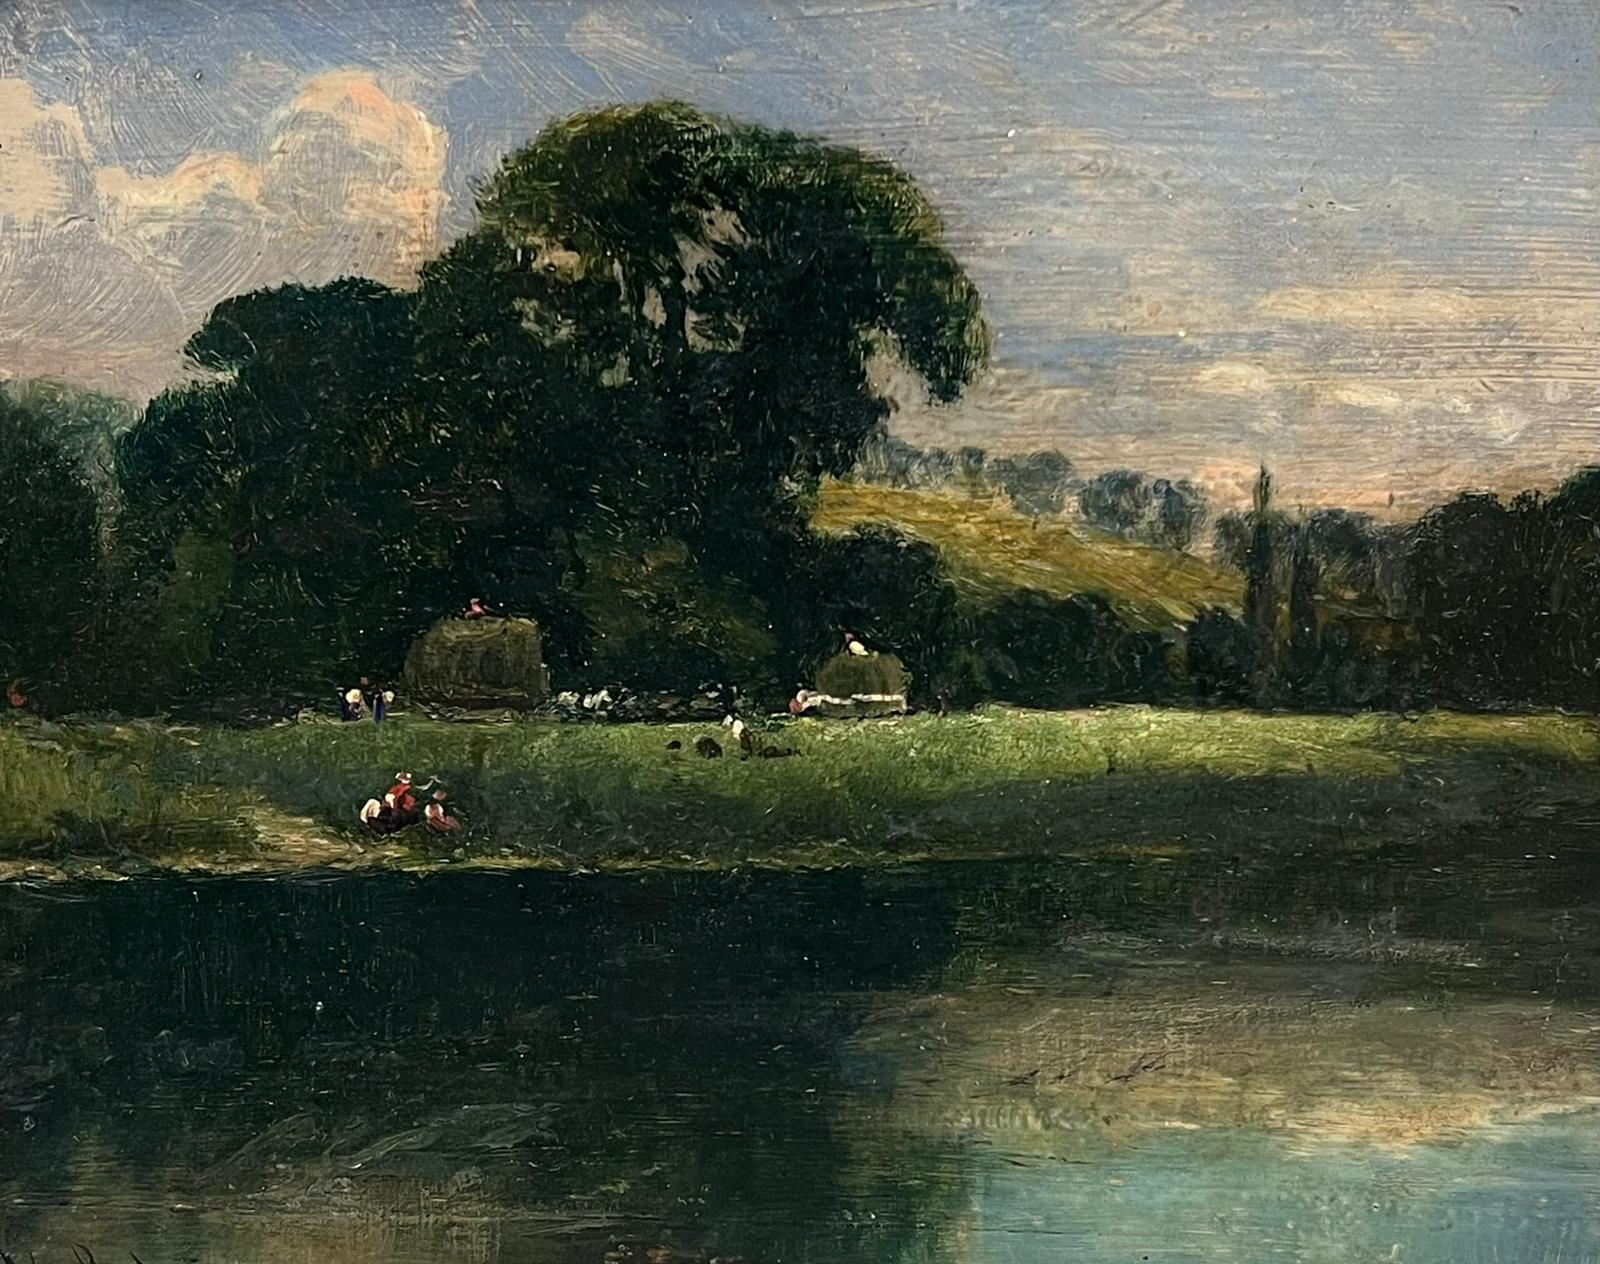 On the Avon
by Thomas Morris Ash (1851-1935)
signed oil painting on board, framed
framed: 10 x 12 inches
board: 7 x 9 inches
provenance: private collection, England
condition: very good and sound condition 

The River Avon is the name of several